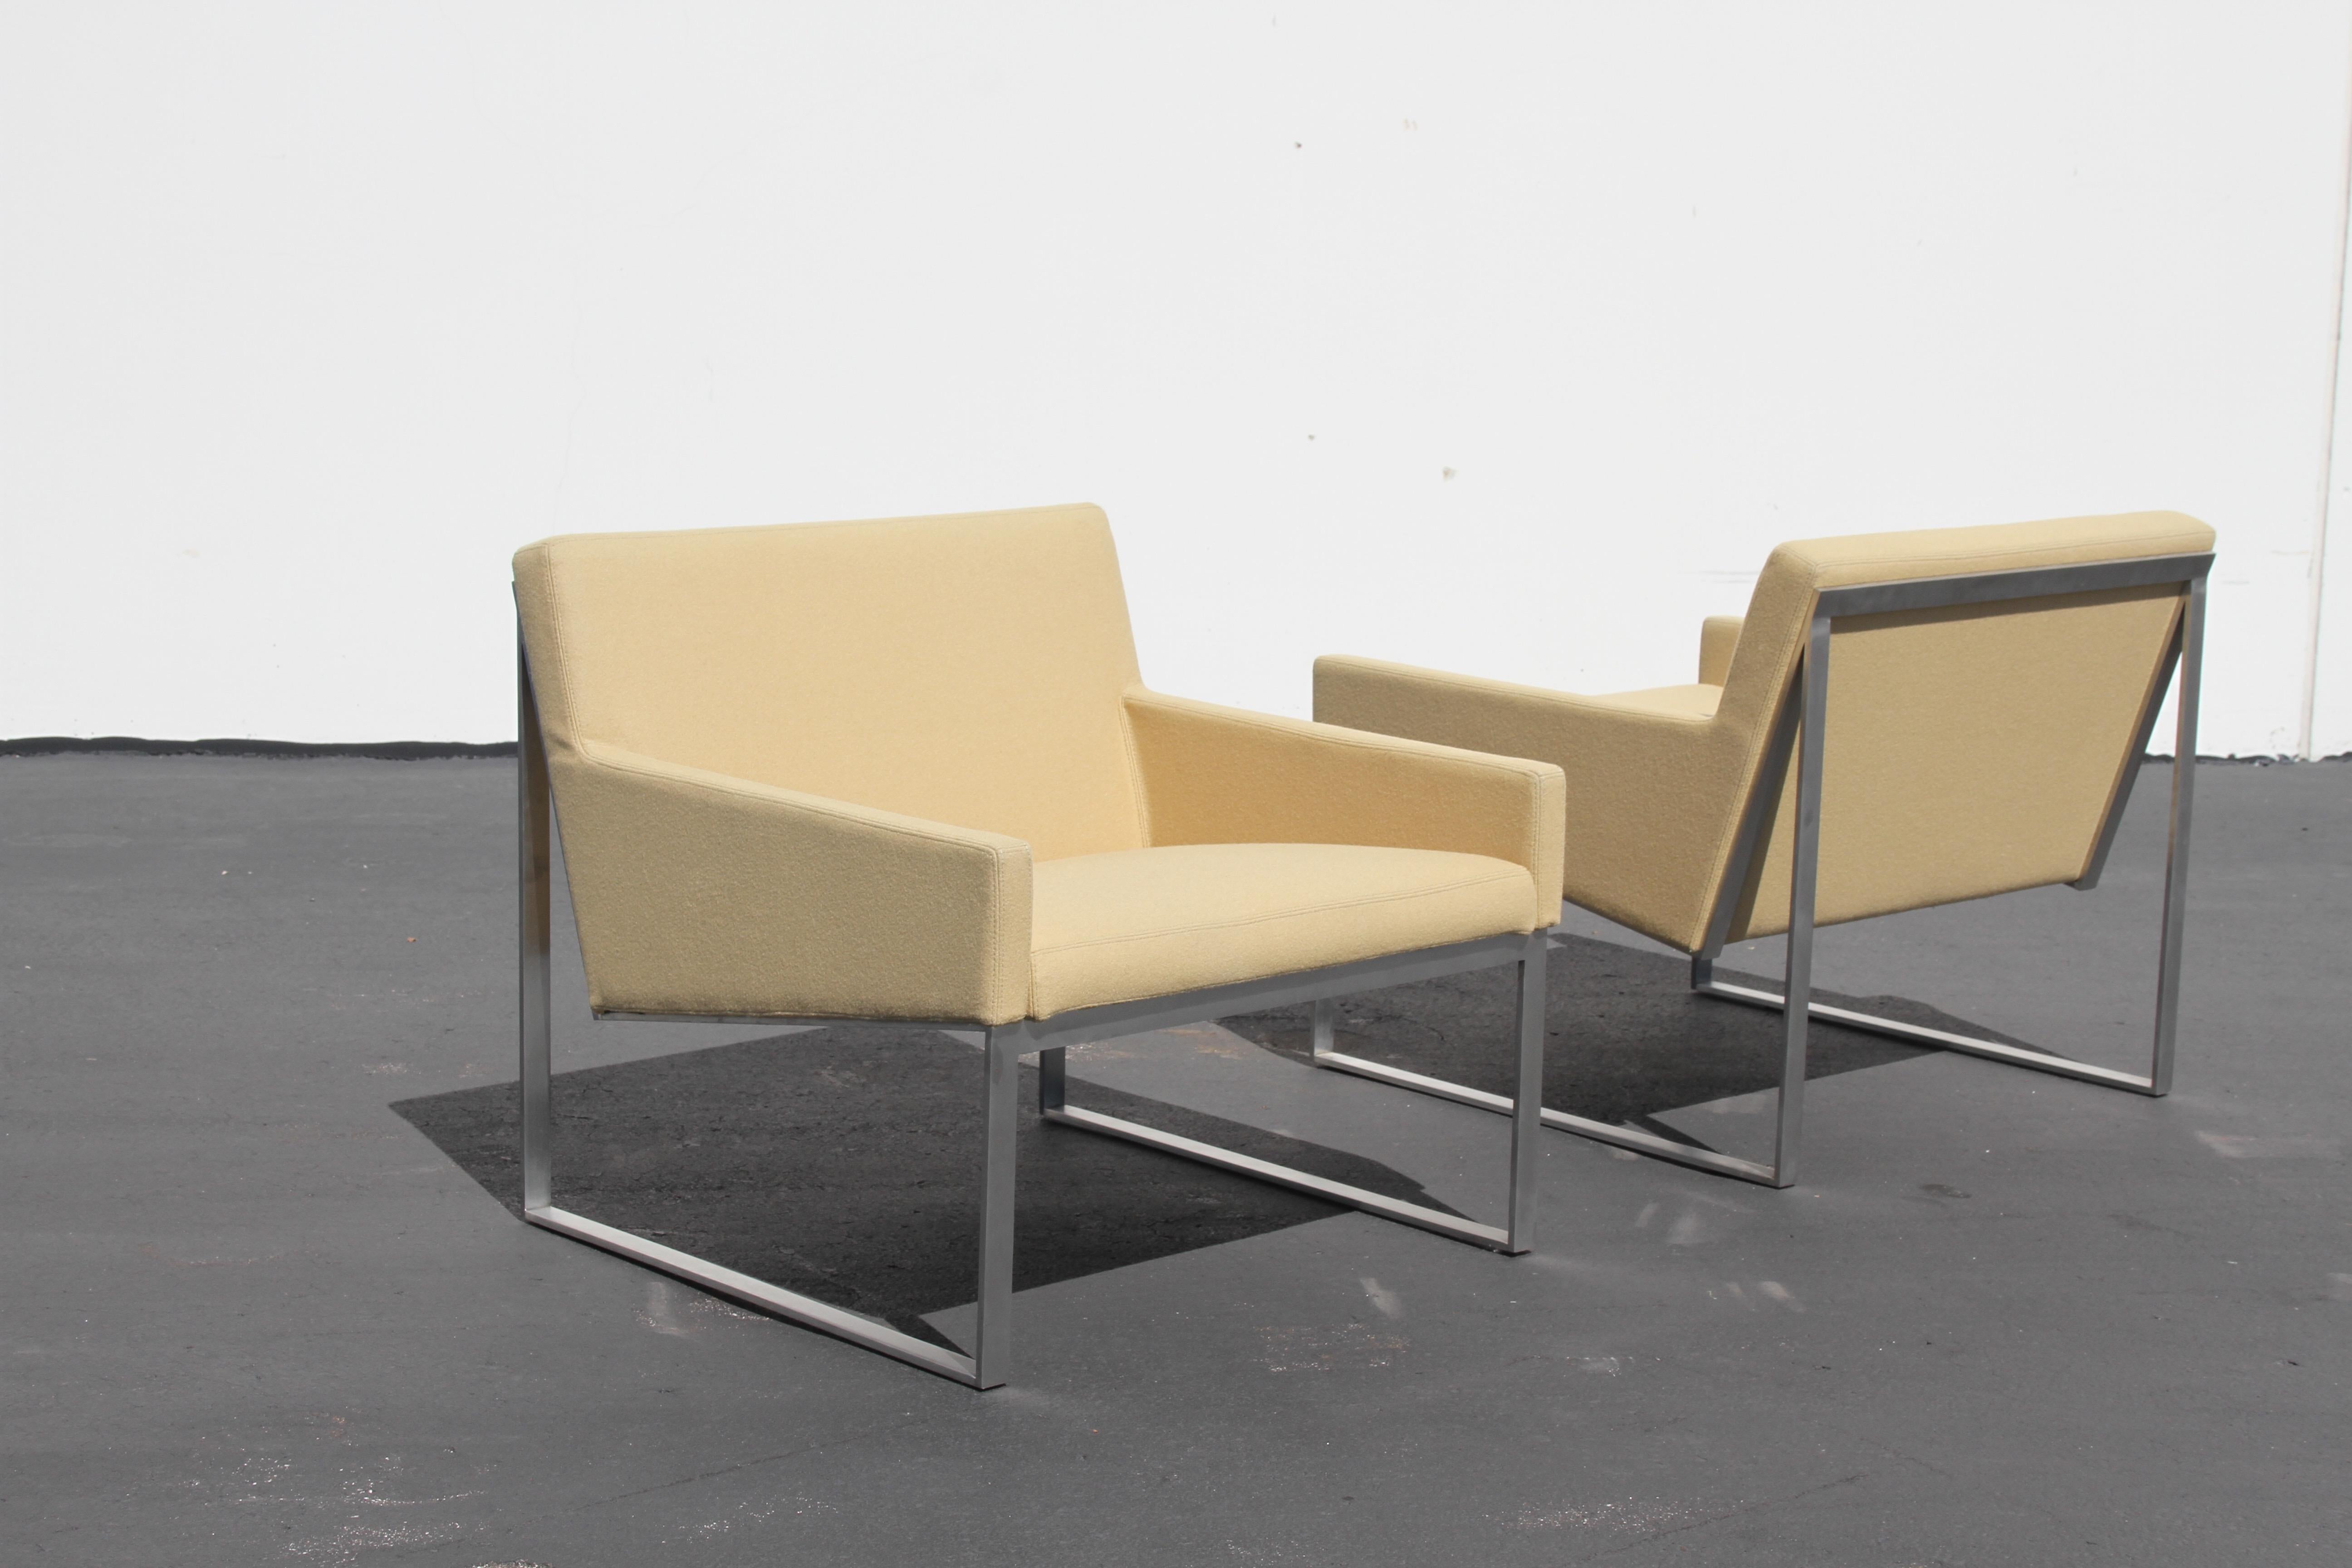 Paris born Fabien Baron designed b.3 lounge chairs for Bernhardt Design. Brushed nickel frames, with blended fiber wool like upholstery. Gently used, 2015 production. Simplicity at its best, very well built and elegant design. Minor scuffs to metal,